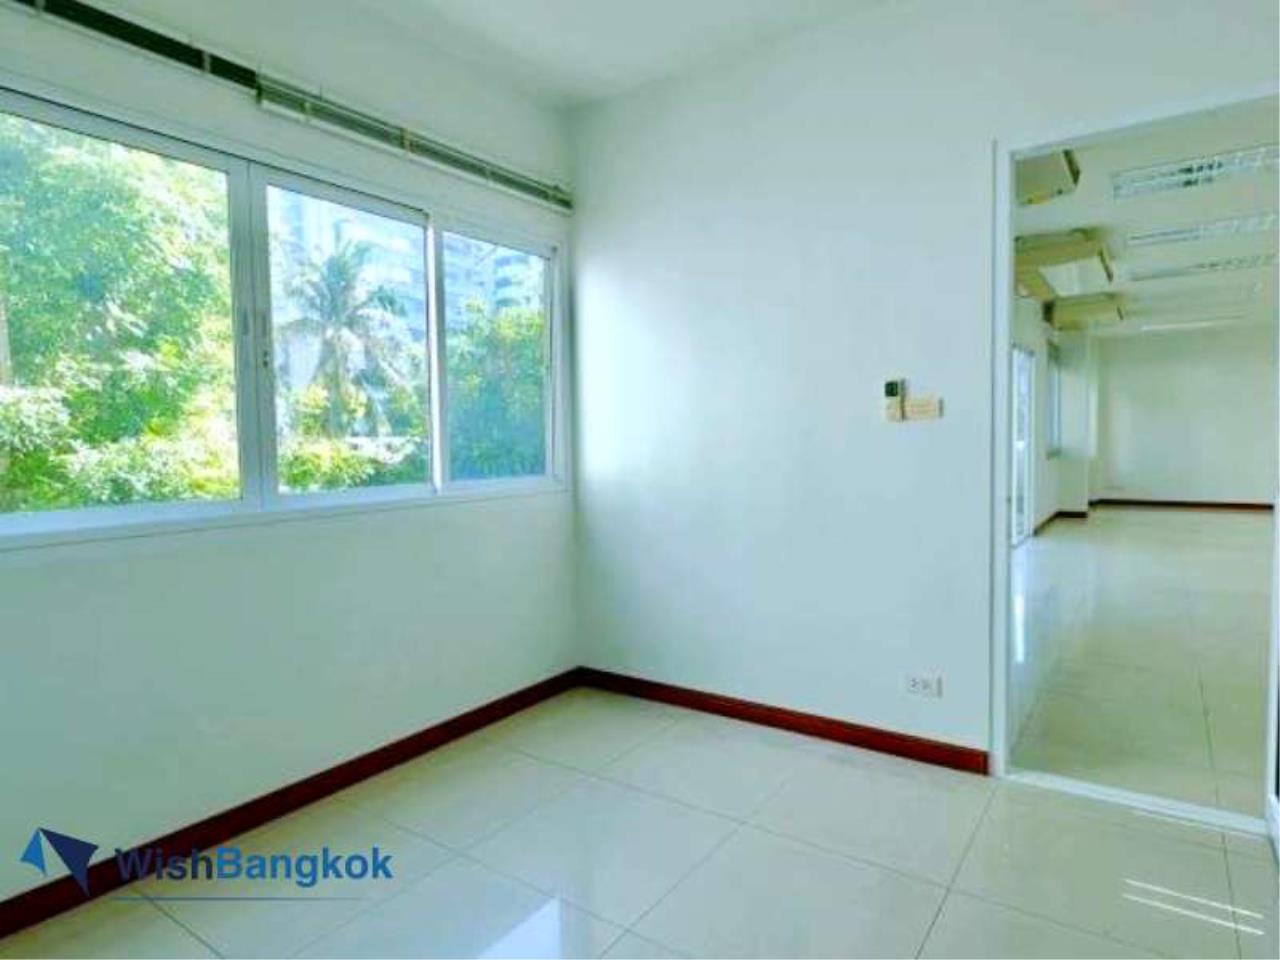 Wishbangkok Agency's Office for rent in Sathorn area Near BTS Chong Nonsi , Office with Balcony space of 200 SQM Only 85K  5